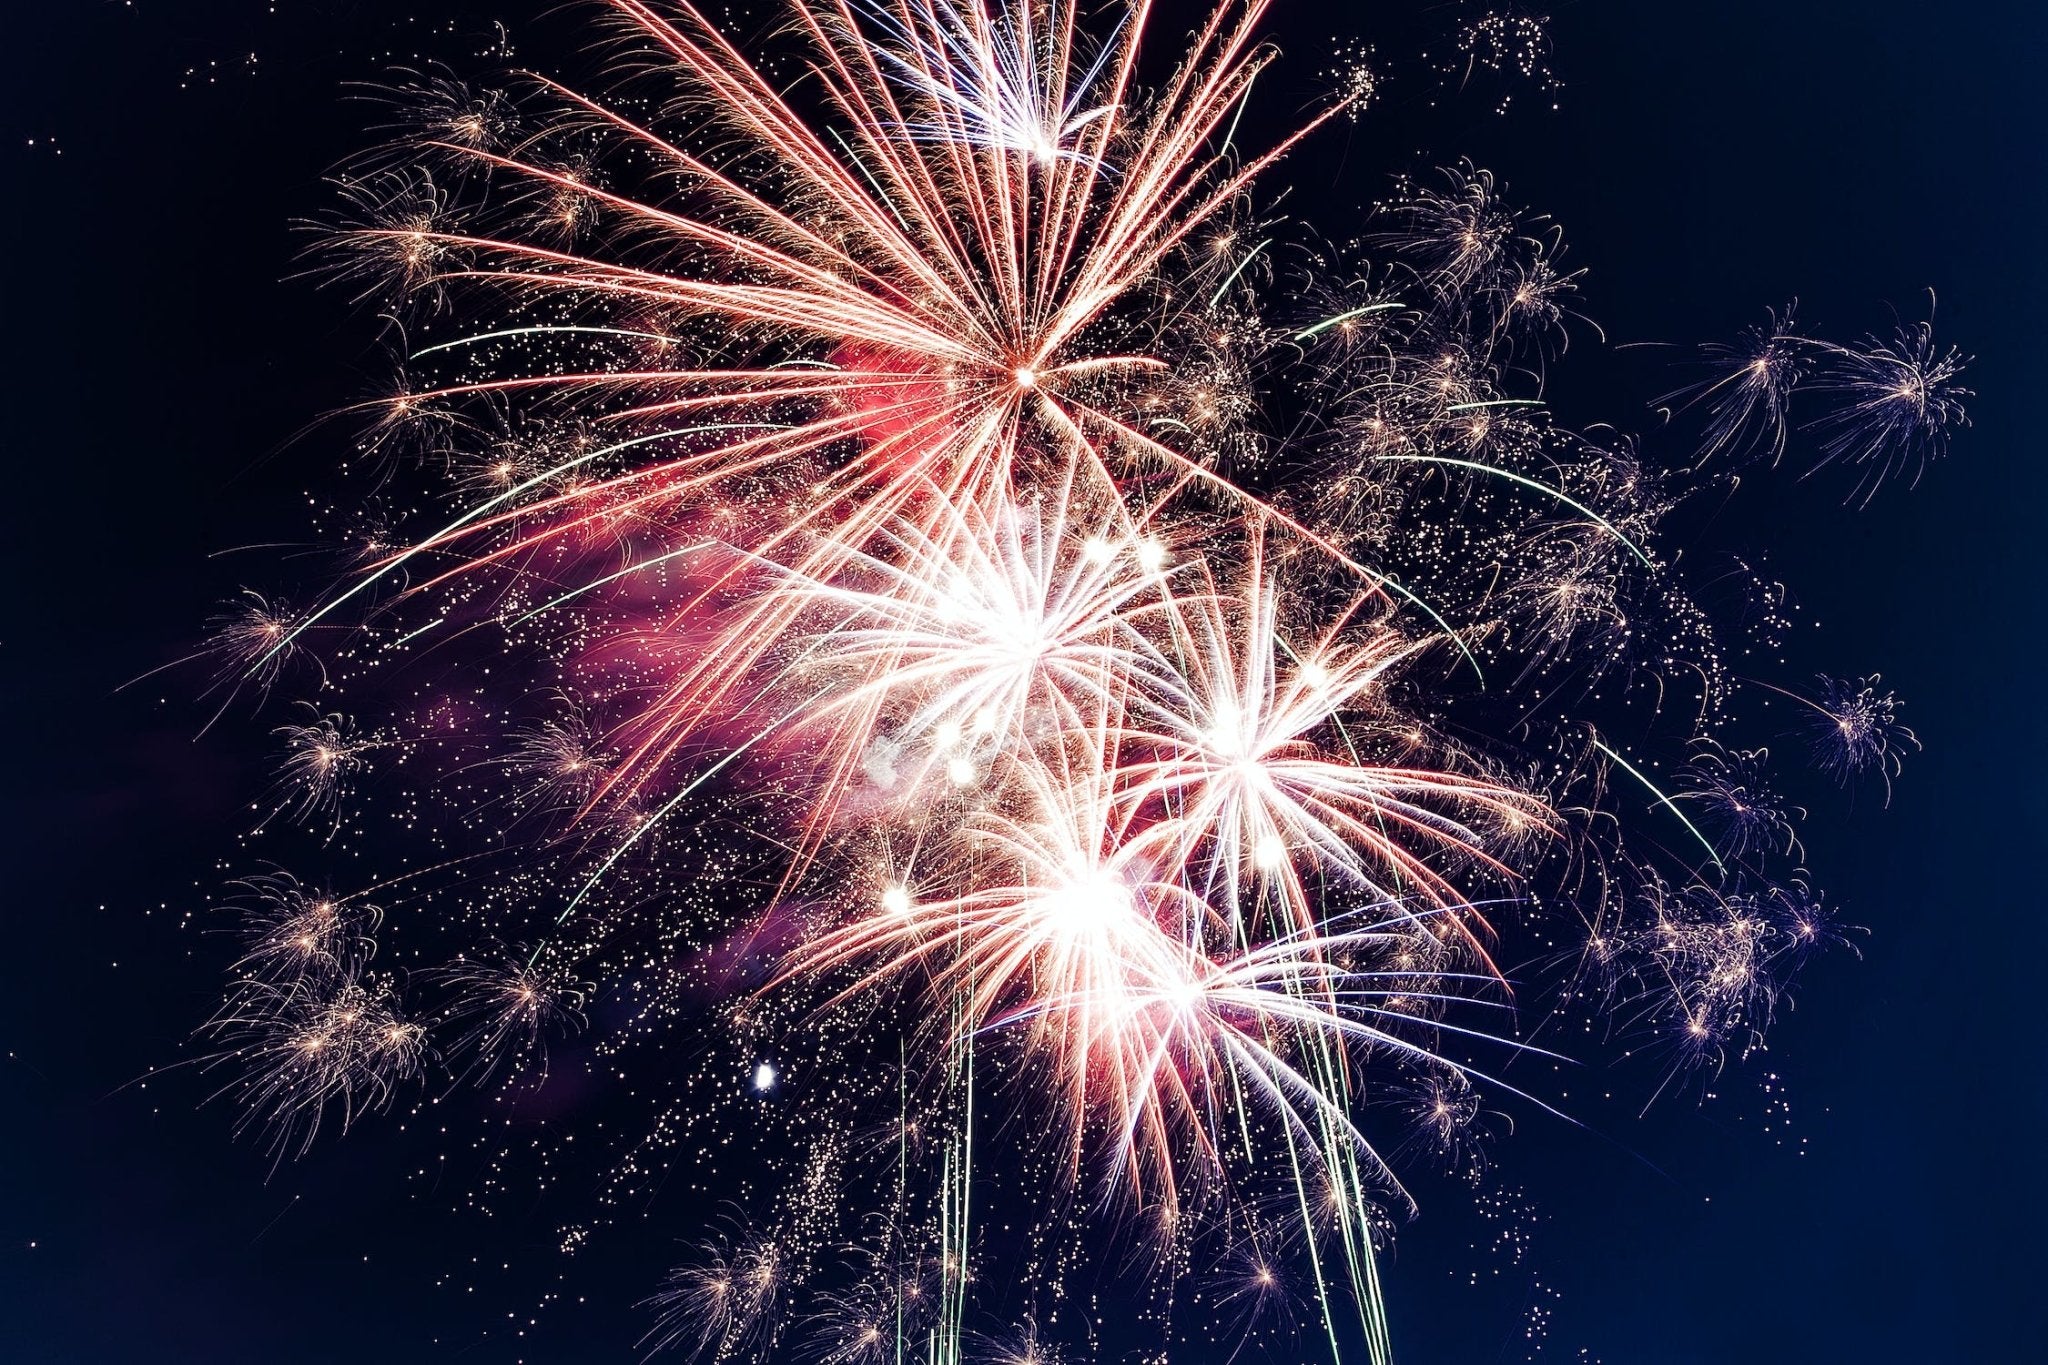 How to Photograph Fireworks - B&C Camera